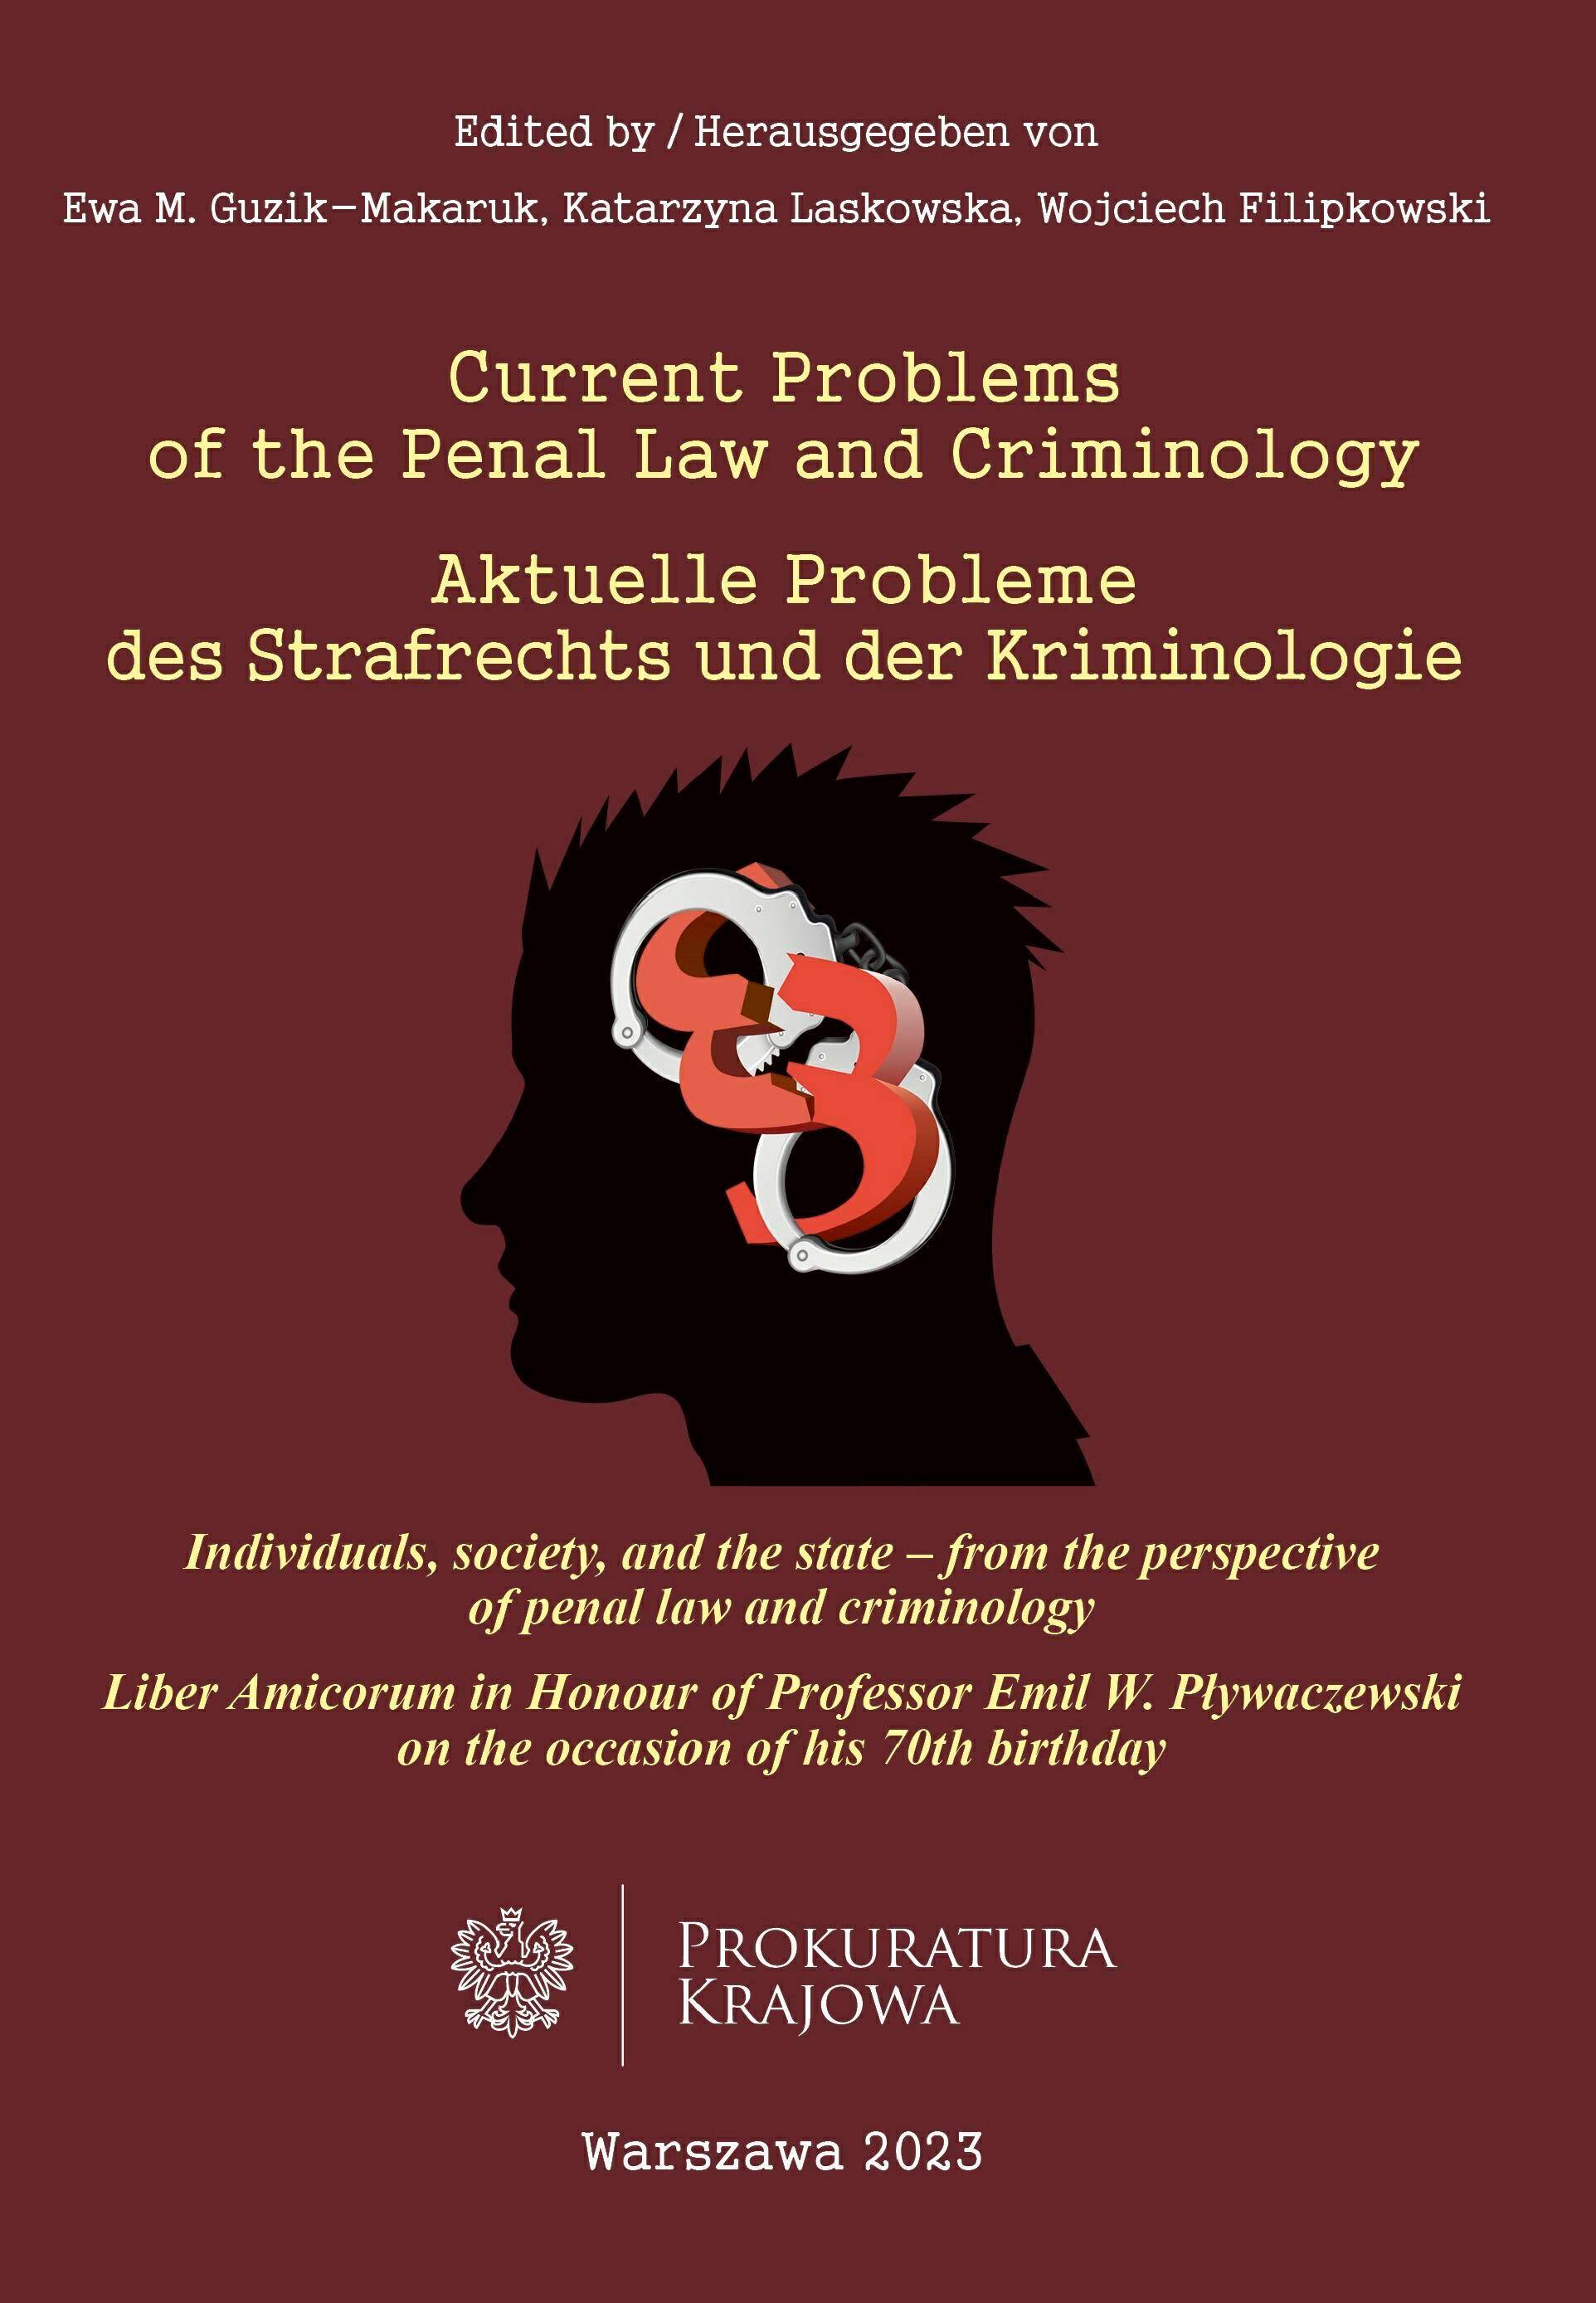 Current Problems of the Penal Law and Criminology. Individuals, society, and the state – from the perspective of penal law and criminology. Liber Amicorum in Honour of Professor Emil W. Pływaczewski on the occasion of his 70th birthday.